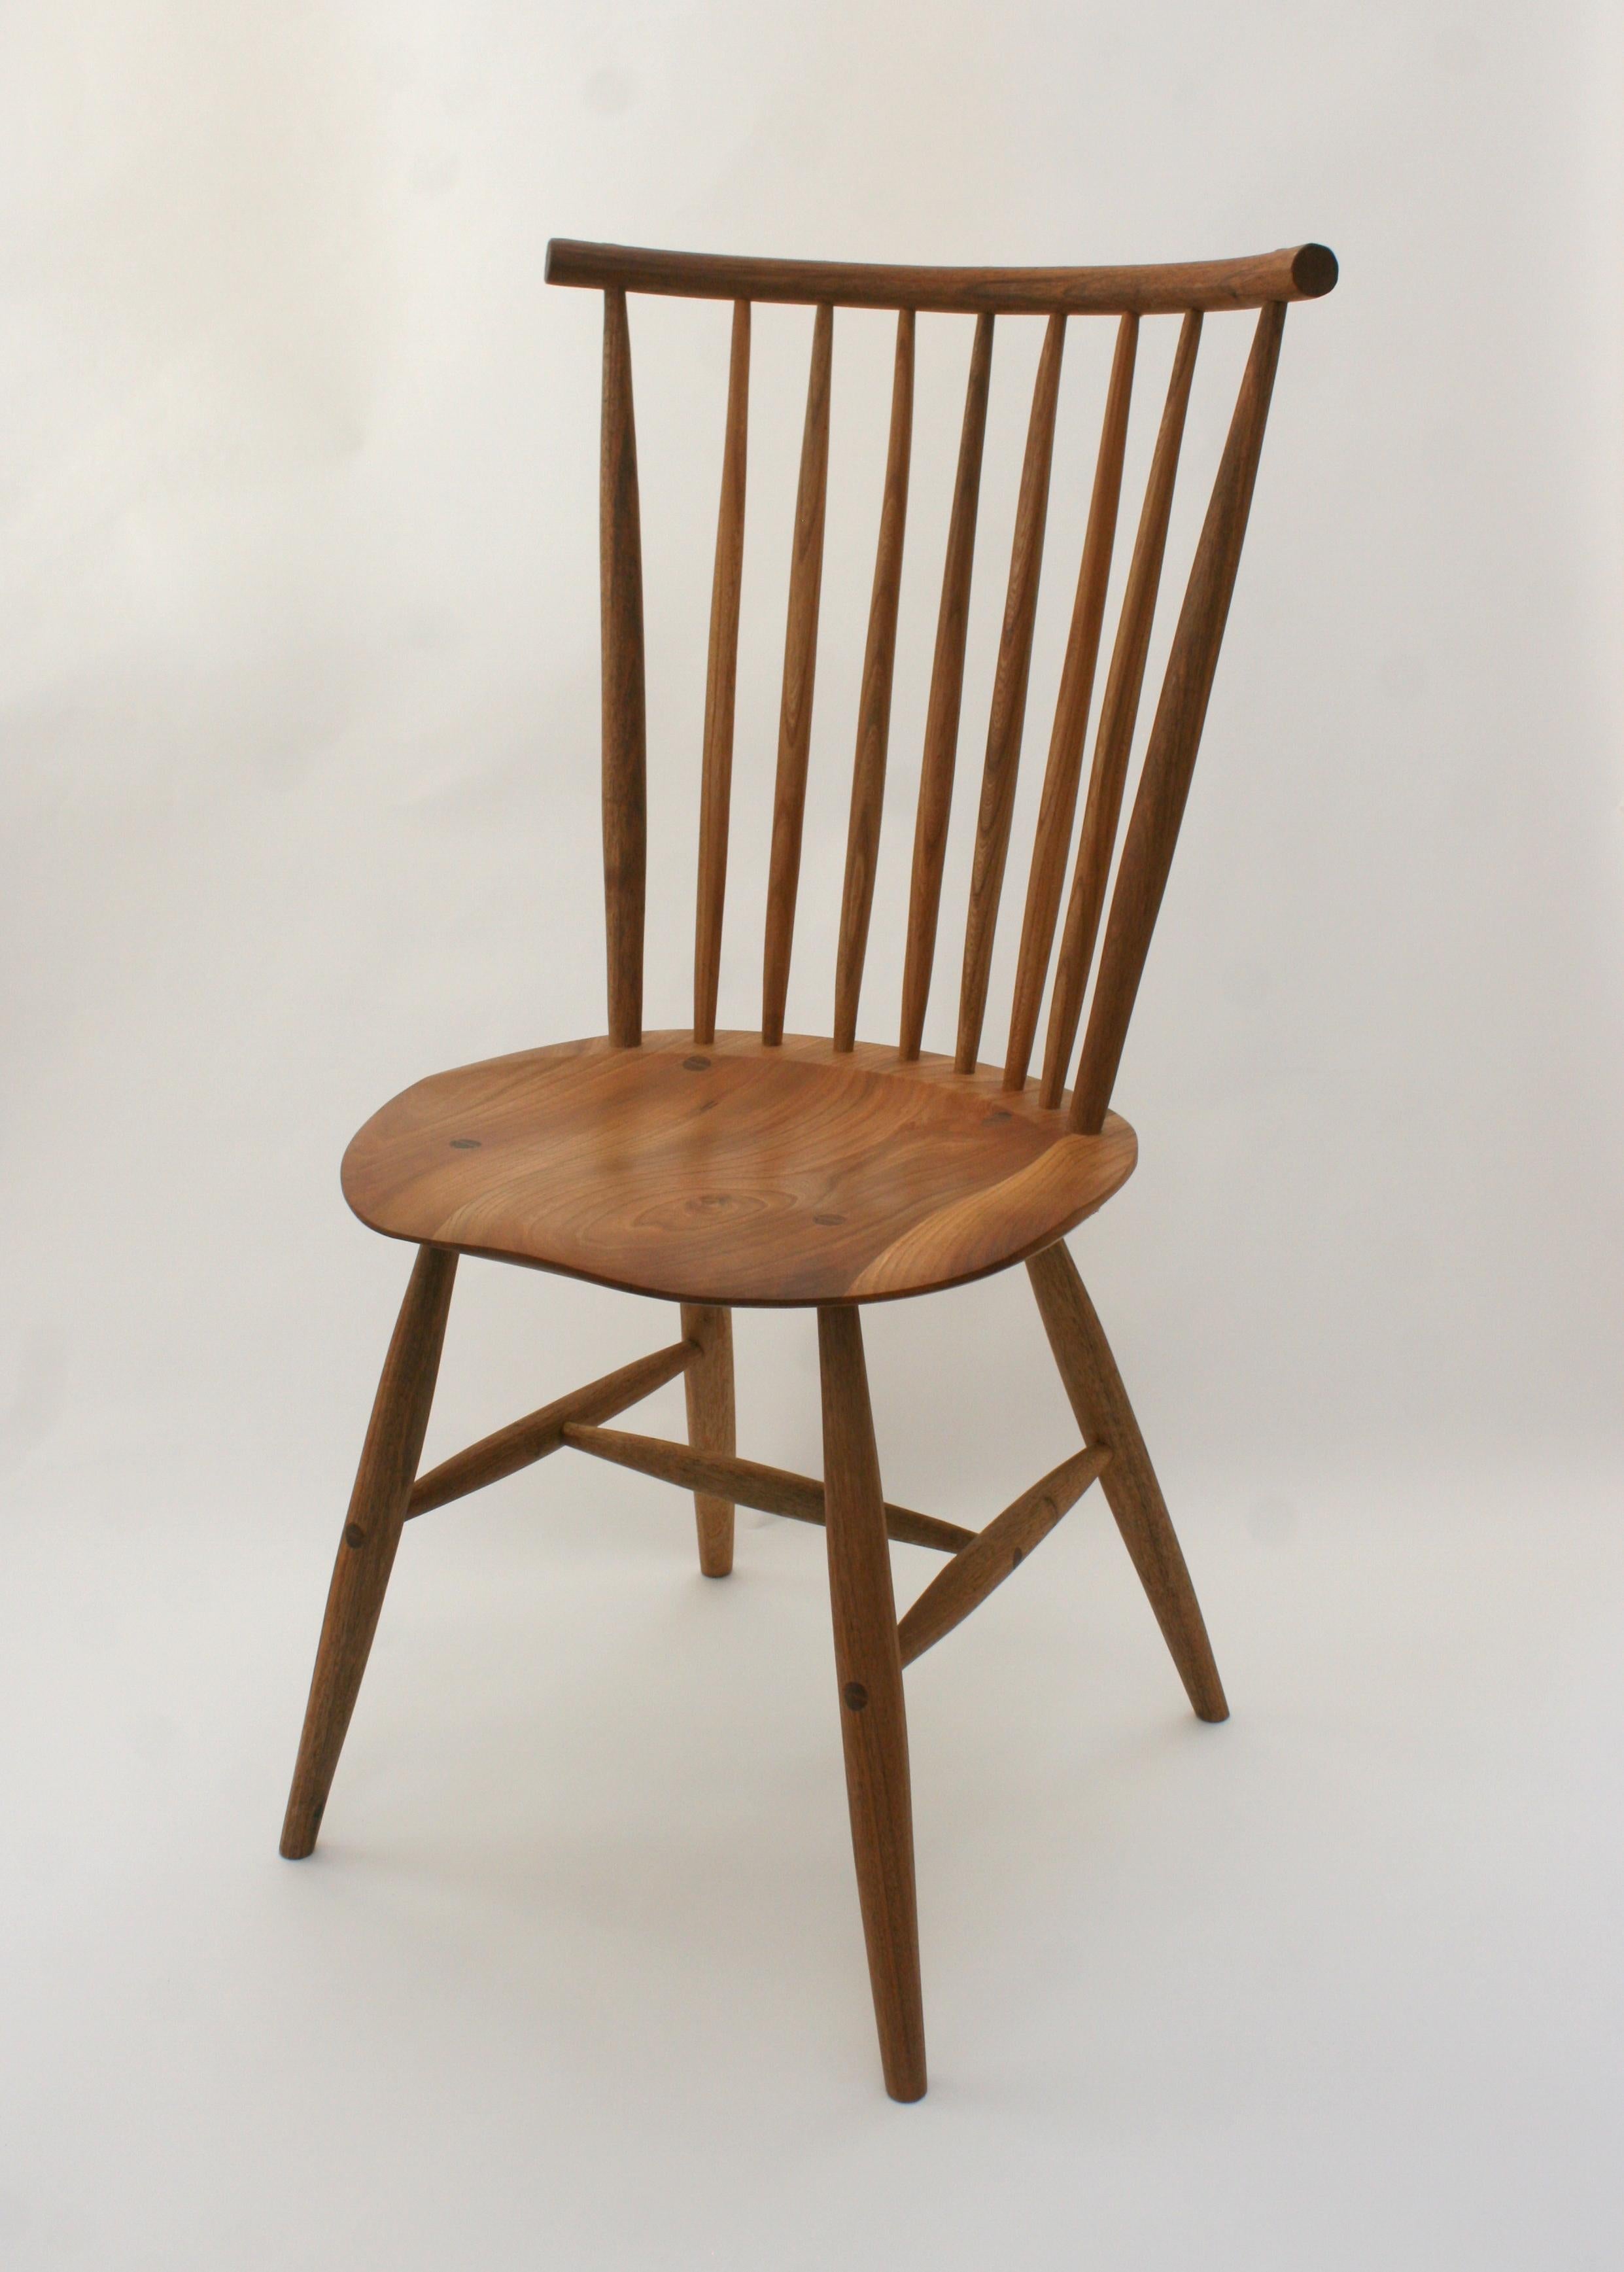 Made to order windsor chair by German Woodworker Fabian Fischer. Made in the tradition and quality of American Studio Craftsmanship. The price reflects the chair made in oak but can also be made in cherry and walnut for a 10% addition on the price